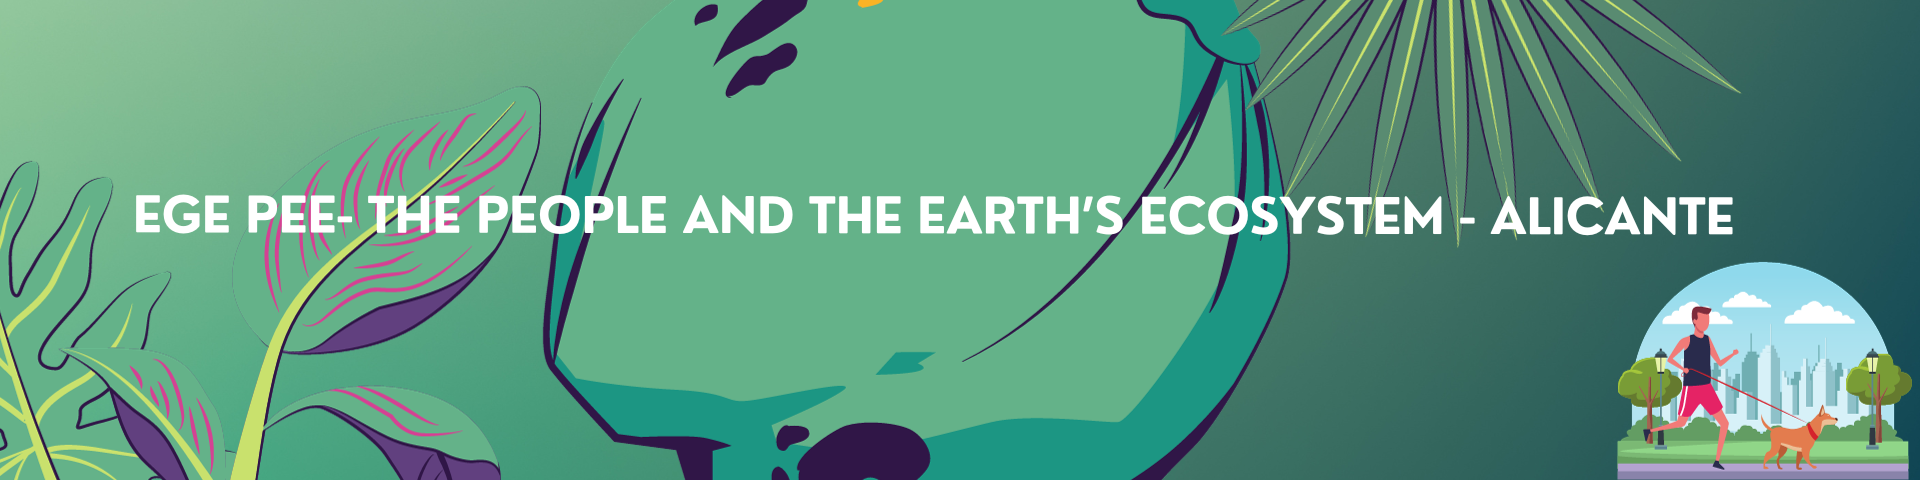 EGE PEE - The Earth and the Ecosystem